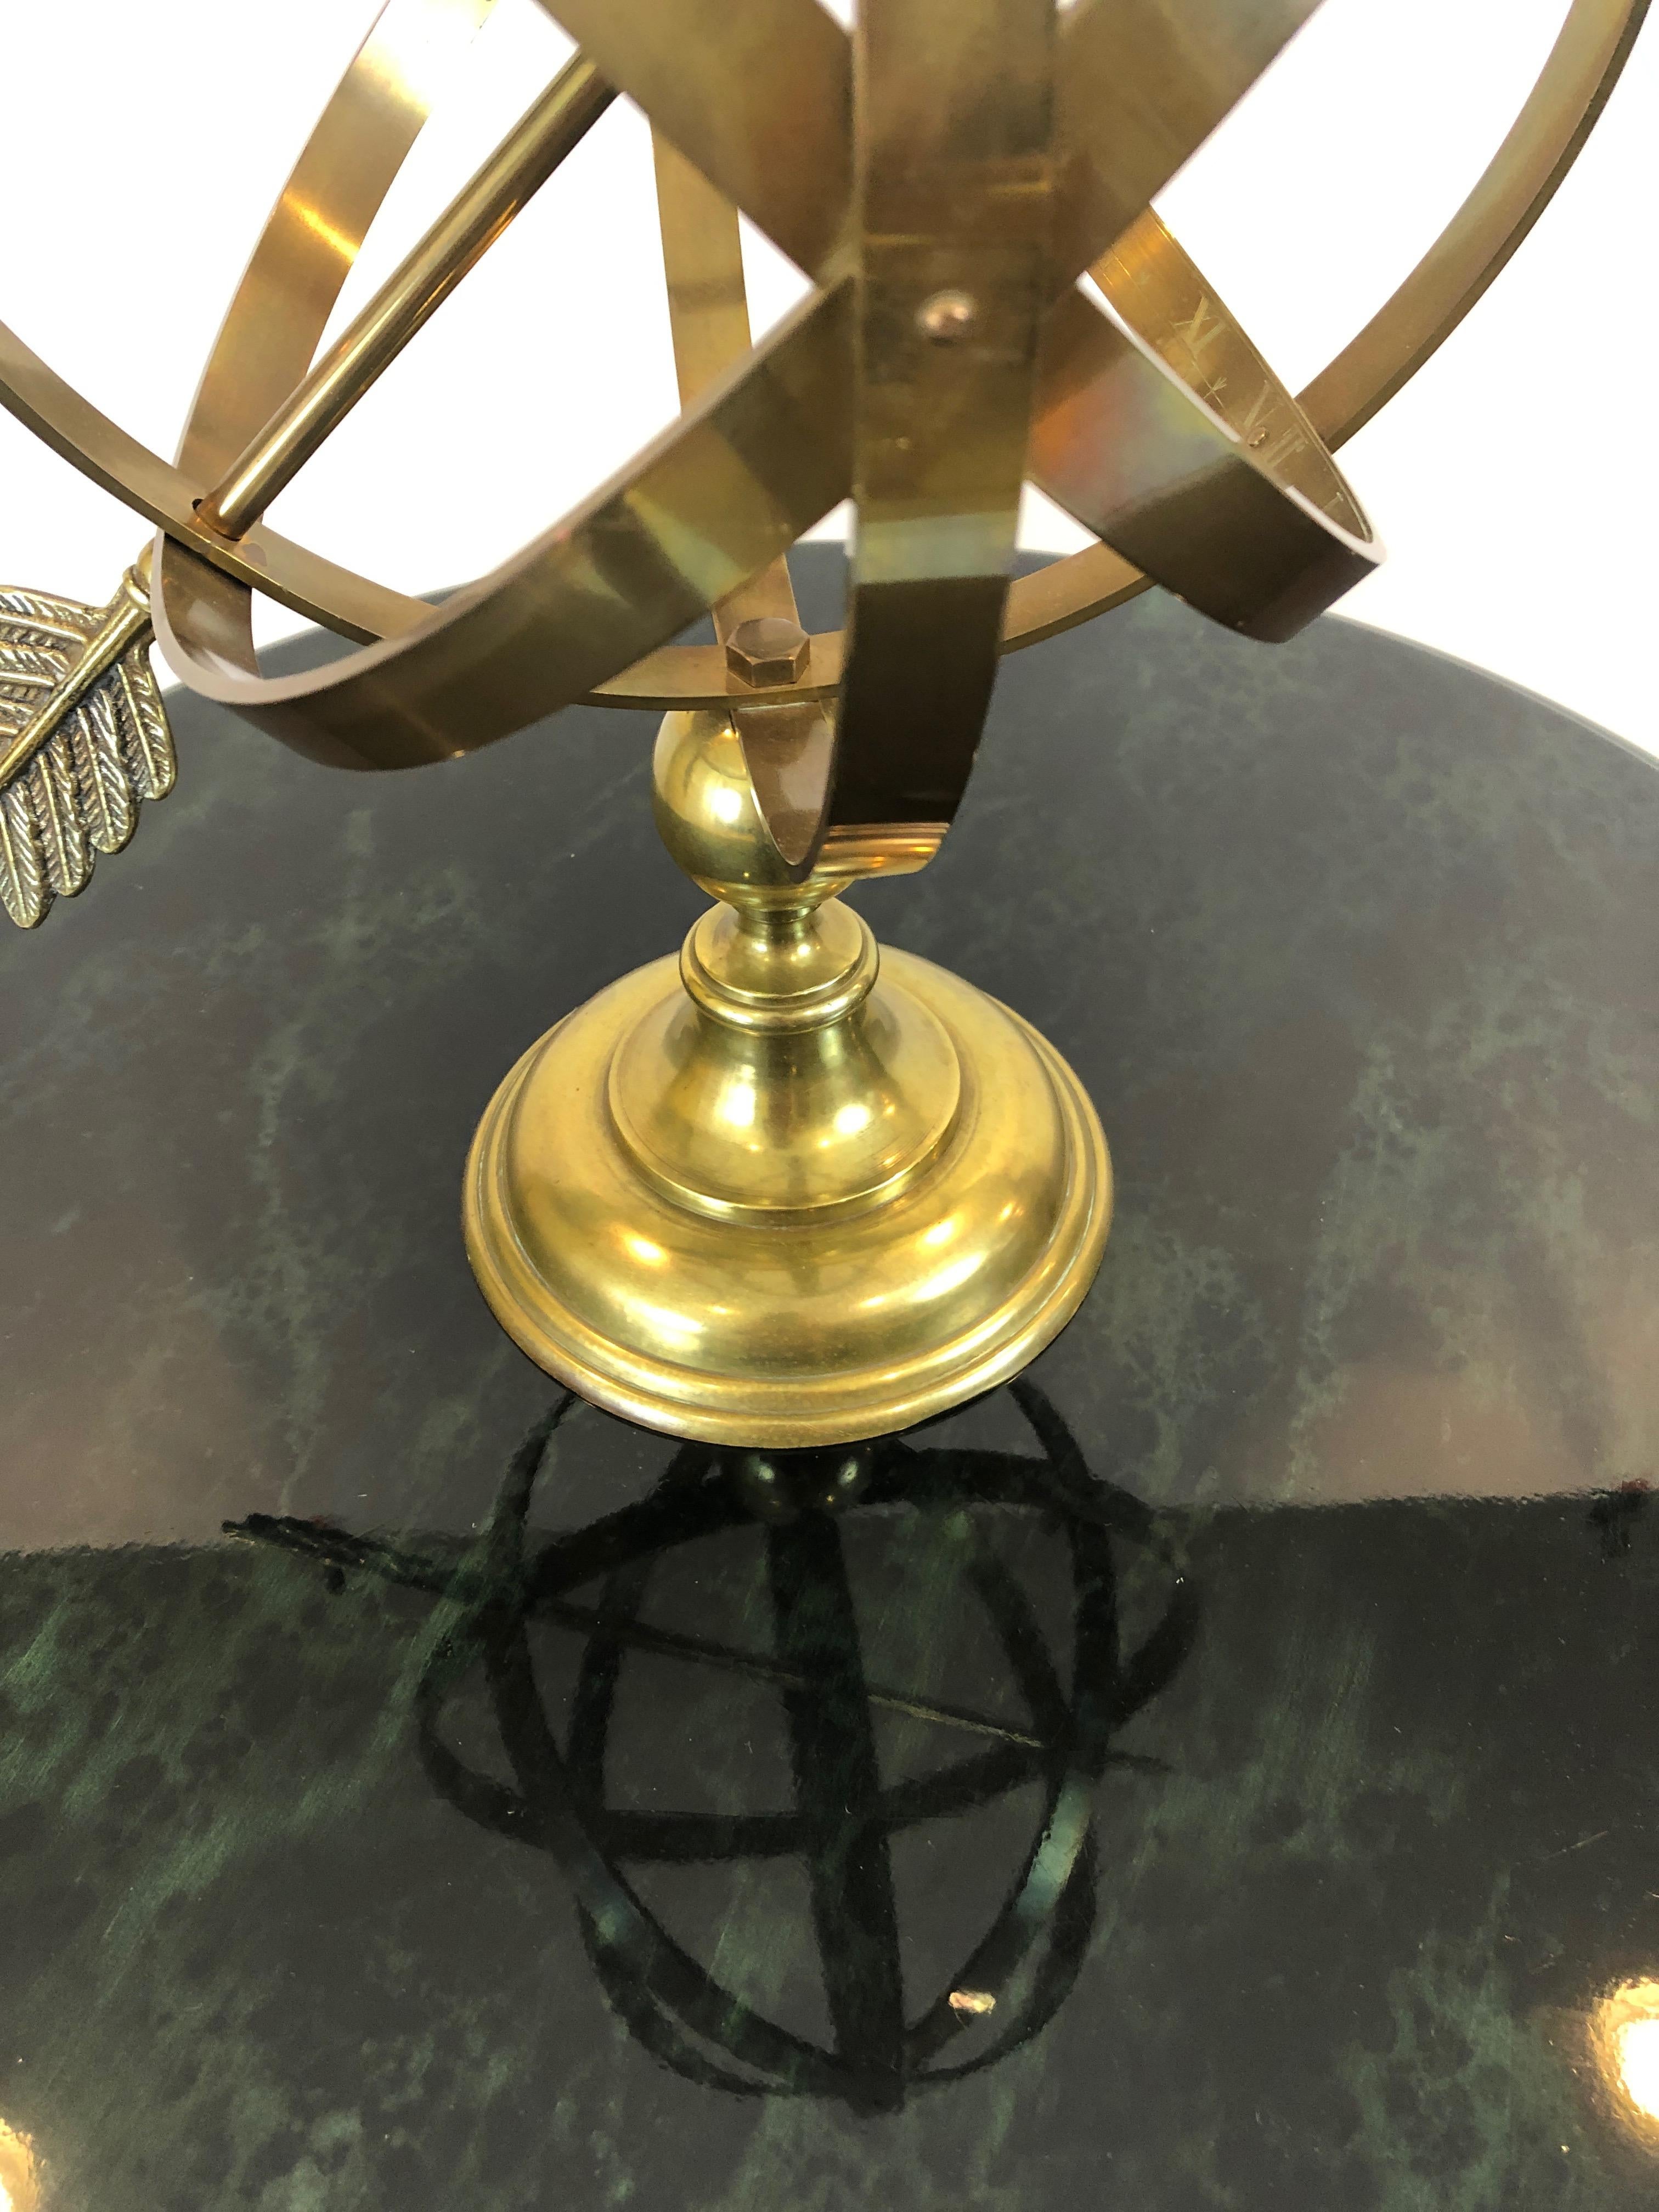 A wonderful table top or desk accessory found in this stunning brass armillary having neoclassical style, arrow piercing the round armature, and Roman numerals etched on the interior of the brass.
Measures: Arrow from tip to tip 16
Diameter of